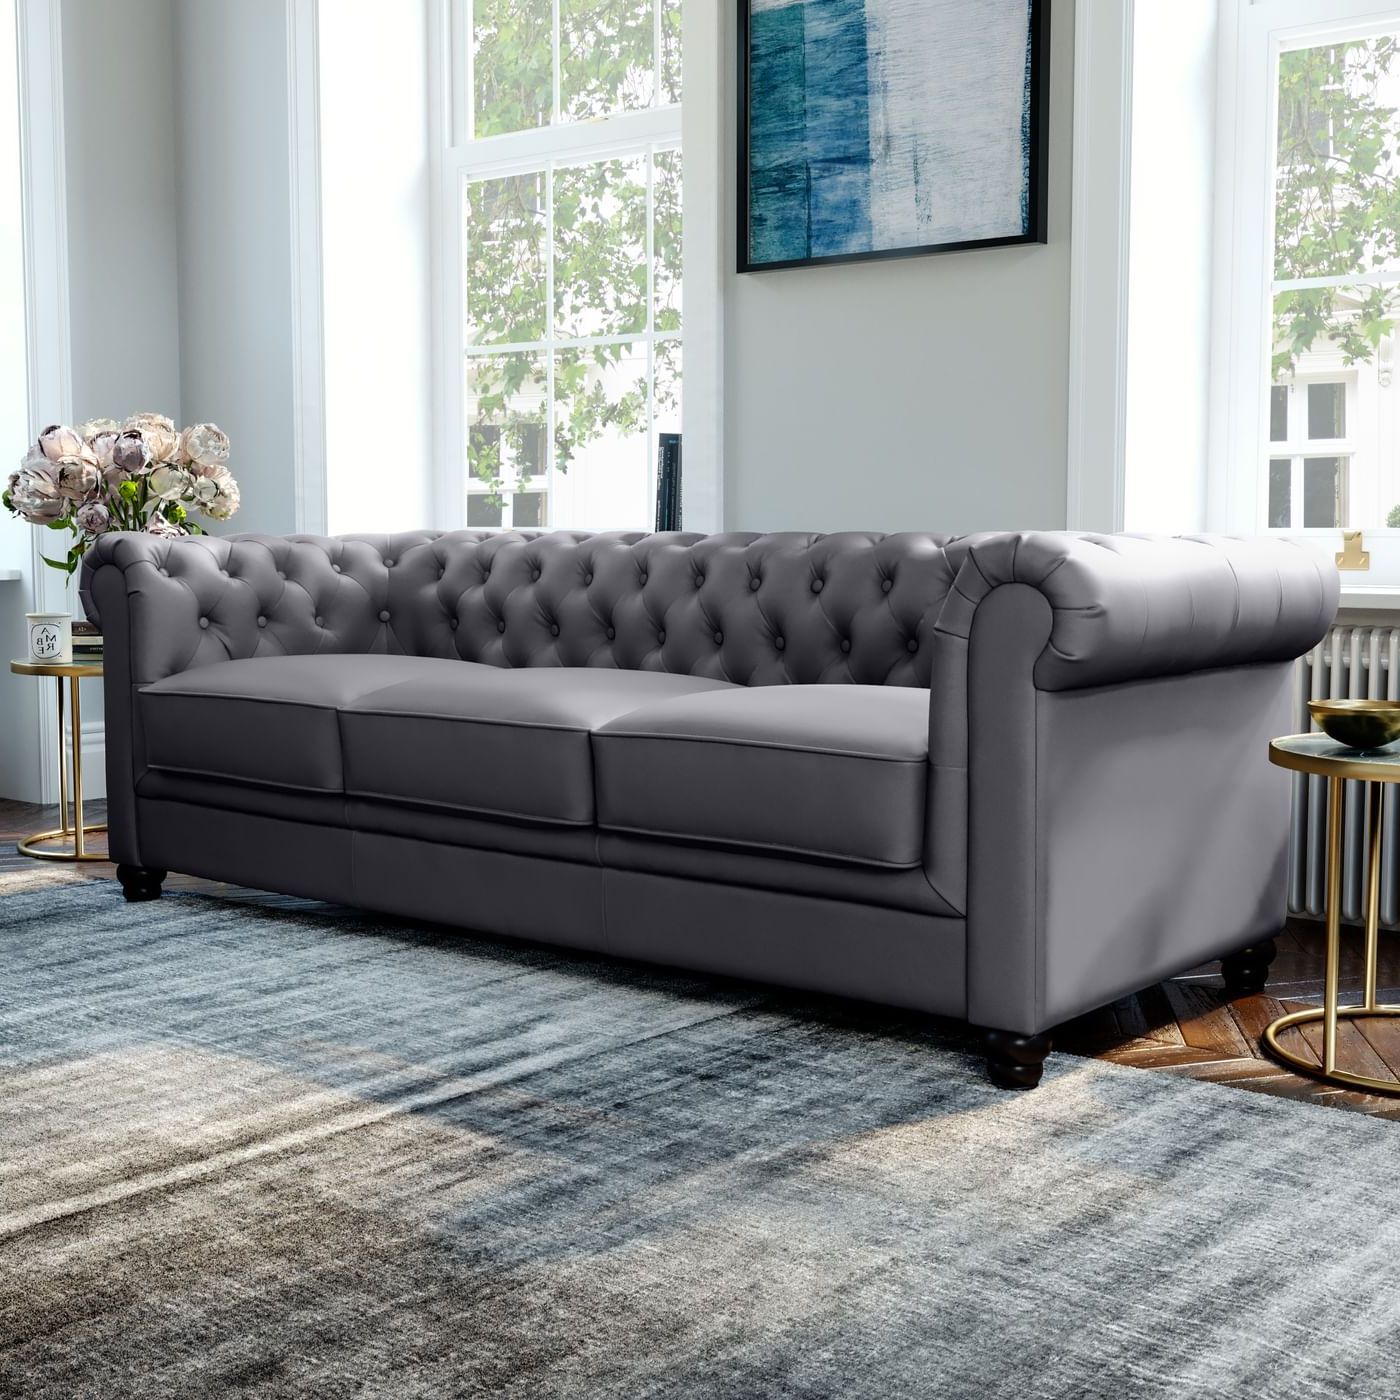 Hampton Grey Leather 3 Seater Chesterfield Sofa | Furniture Choice Inside Chesterfield Sofas (View 6 of 20)